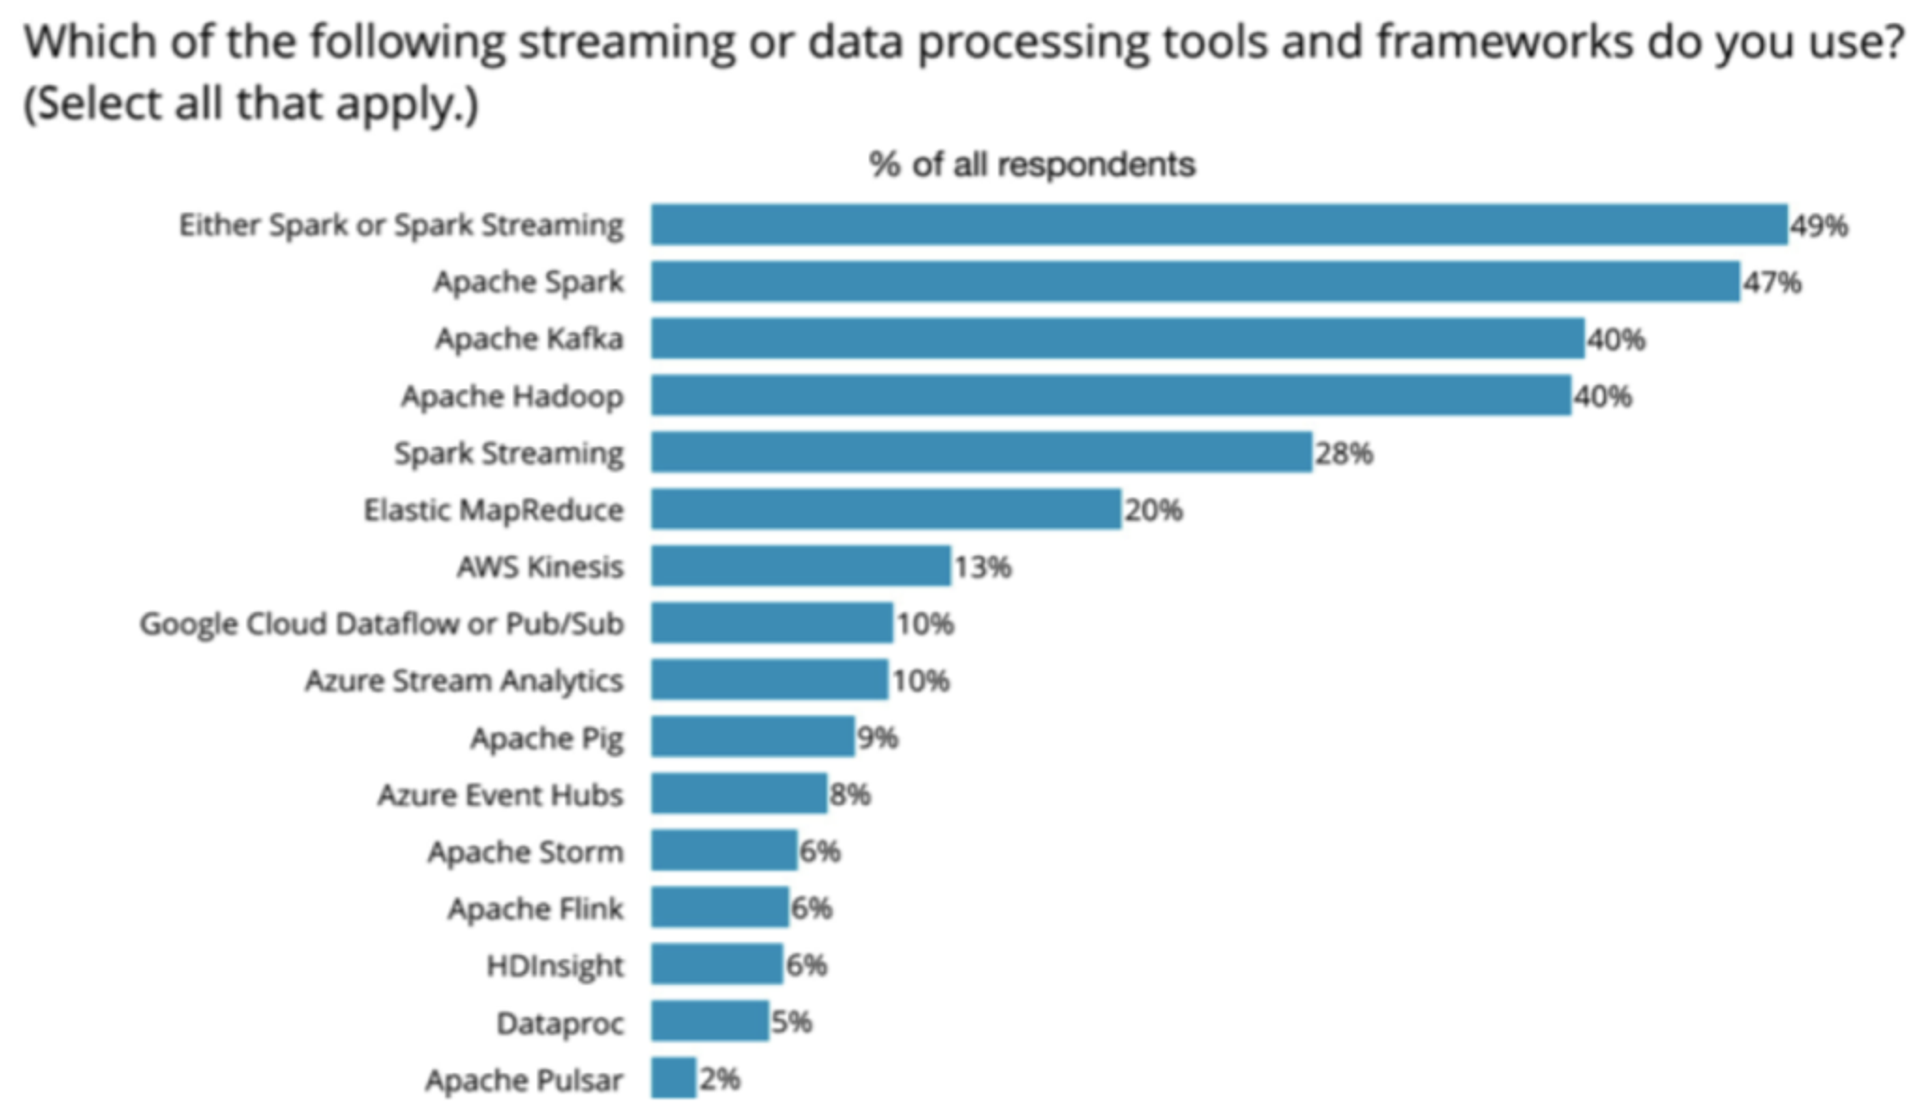 Which of the following streaming or data processing tools/frameworks do you use graph